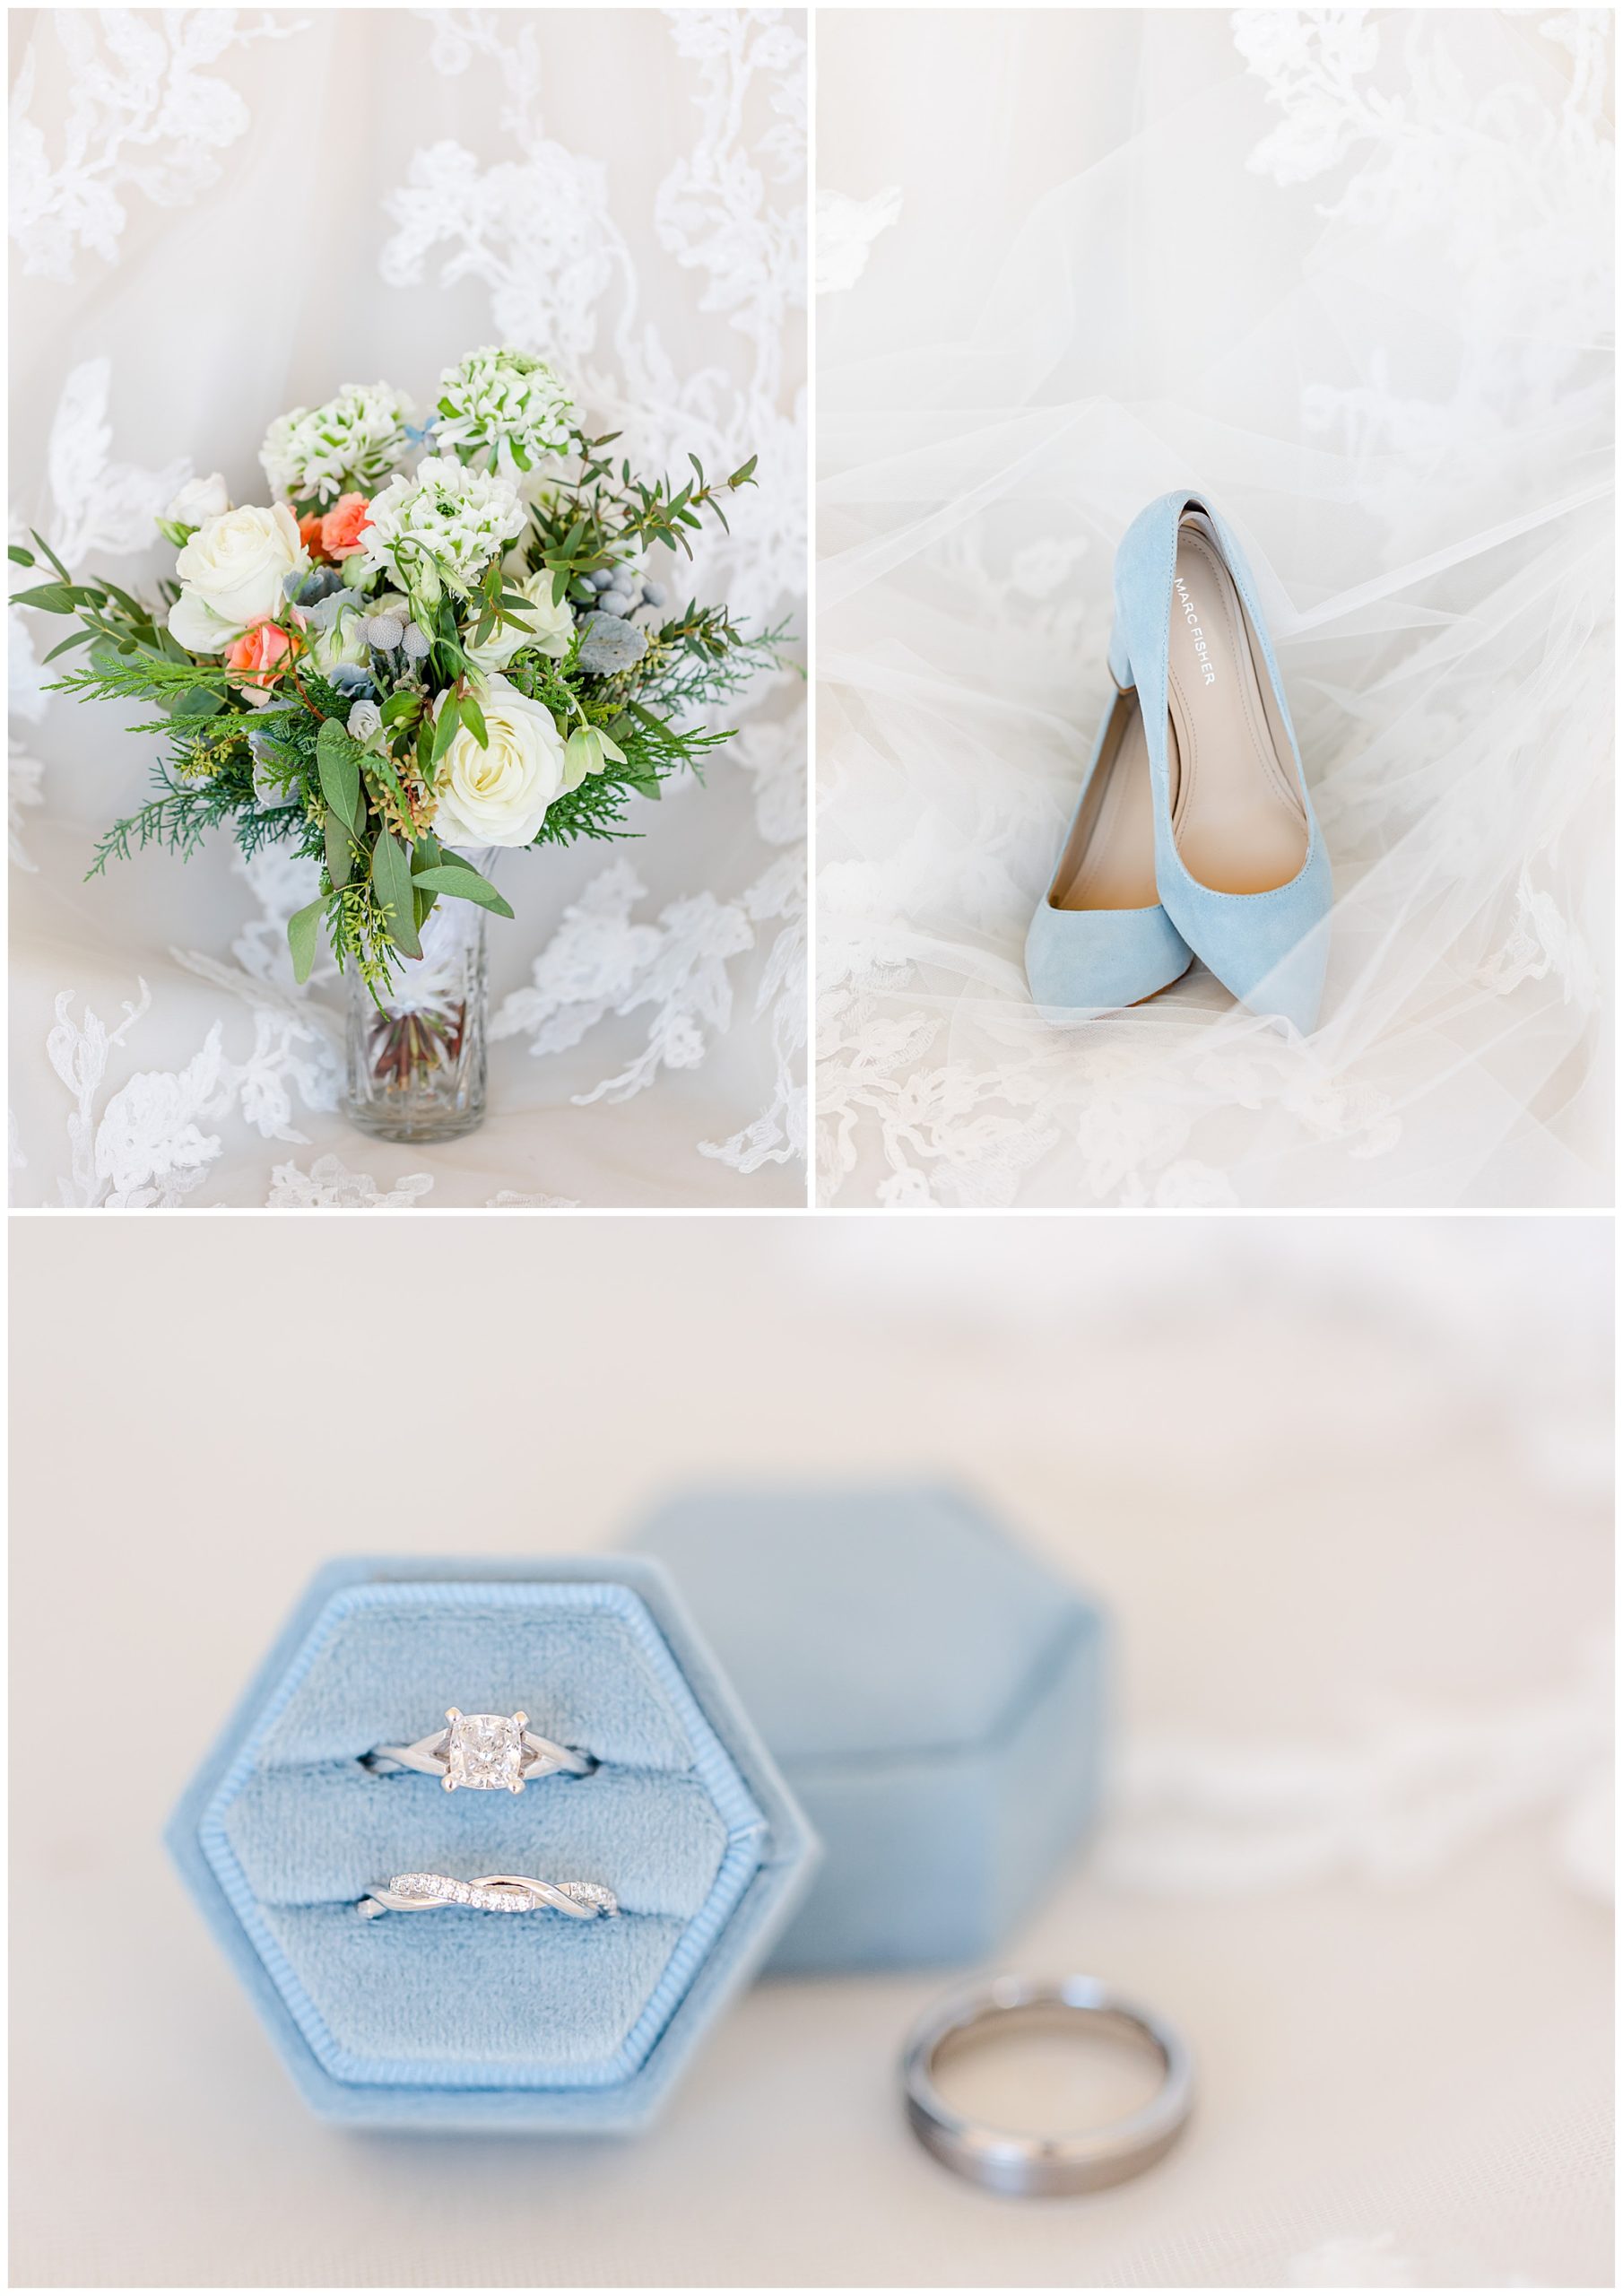 Regency at Dominion Valley wedding, Virginia country club wedding, Haymarket Virginia wedding, northern Virginia wedding, winter wedding, winter wedding aesthetic, DC micro wedding, northern Virginia wedding venues, classic winter wedding, Rachel E.H. Photography, Company Flowers wedding bouquet, baby blue suede shoes, wedding rings